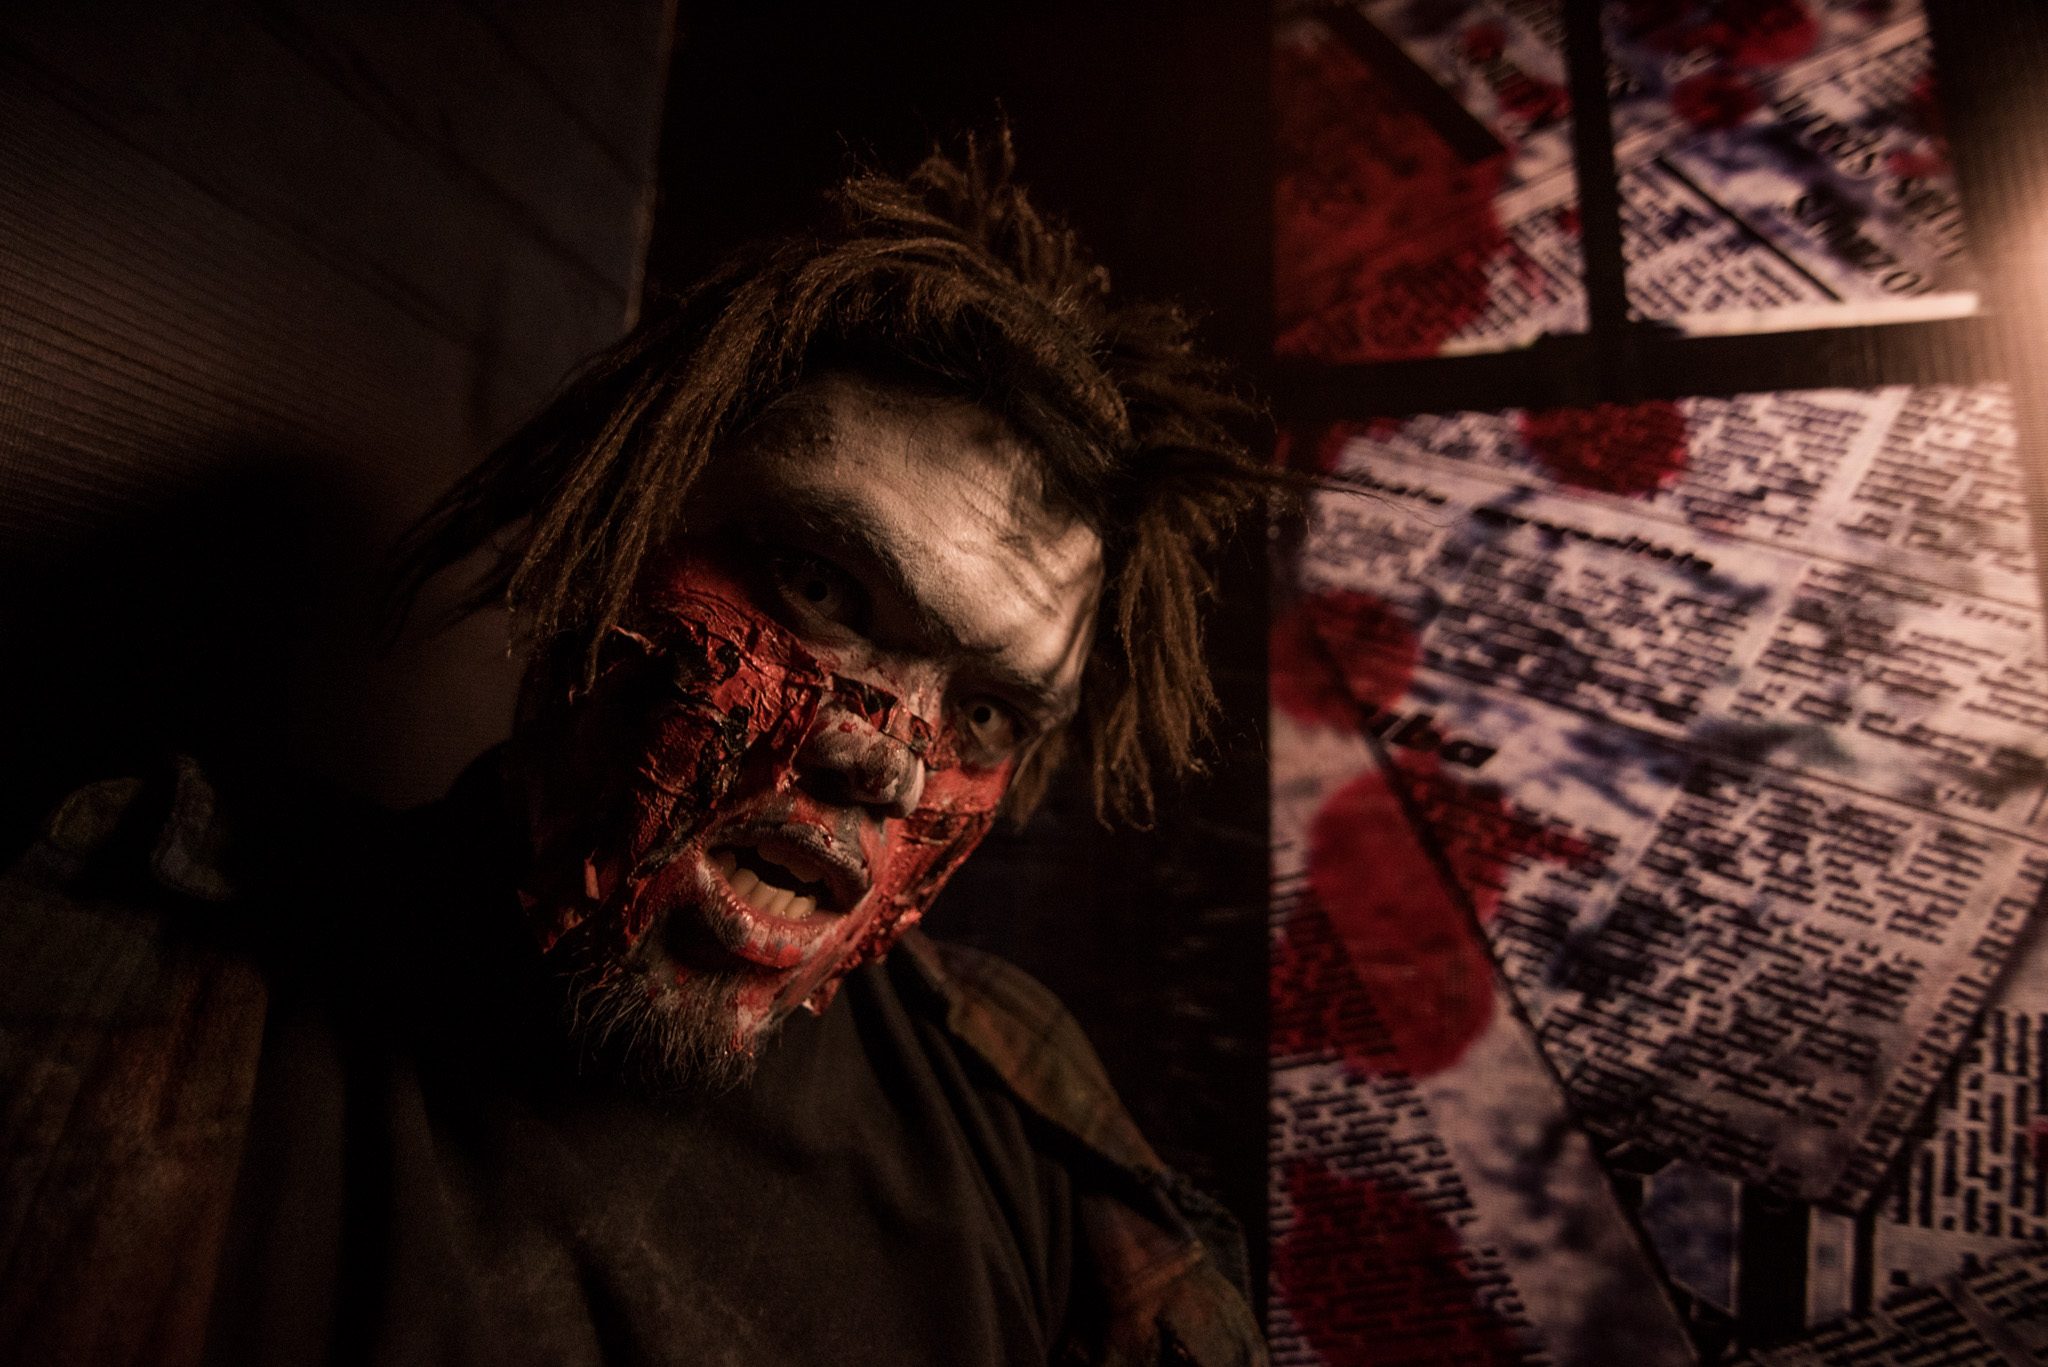 Where to get chased by zombies this Halloween? Try Eastwood’s Haunted Horror House